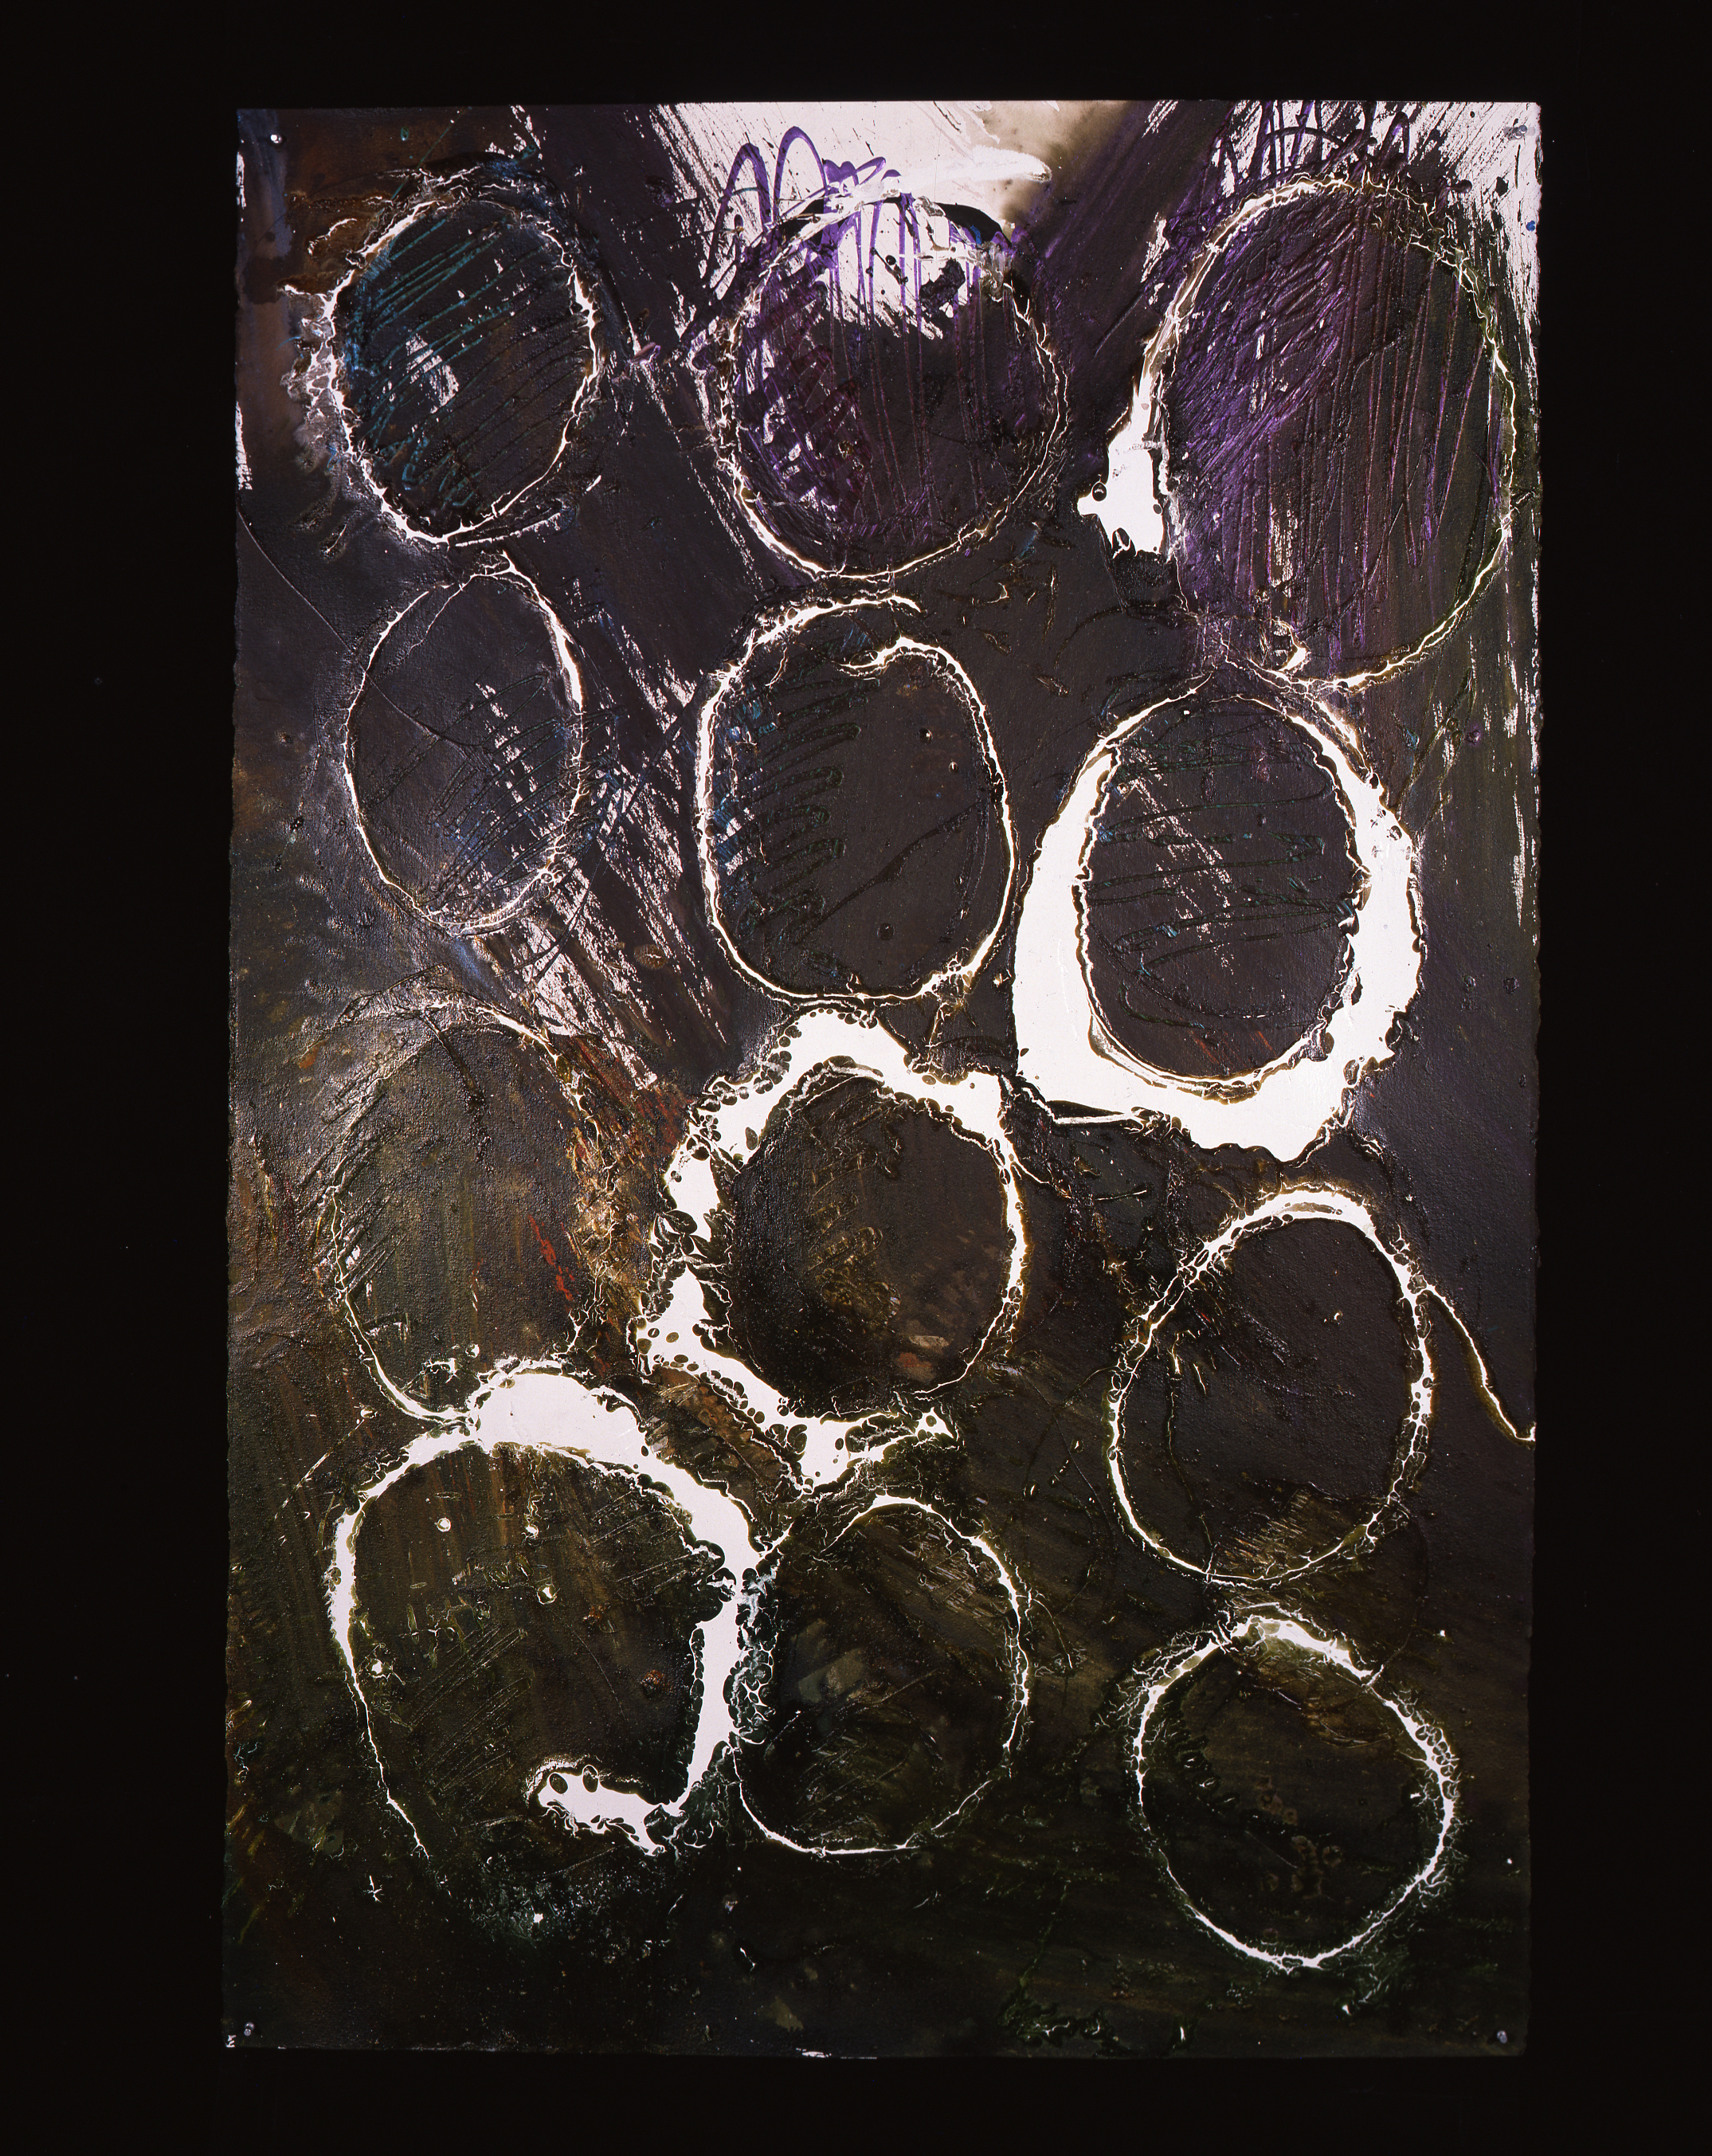  Dale Chihuly,&nbsp; Macchia Drawing #17,&nbsp; (1992, acrylic&nbsp;on paper, 60 x 40 inches), DC.92 